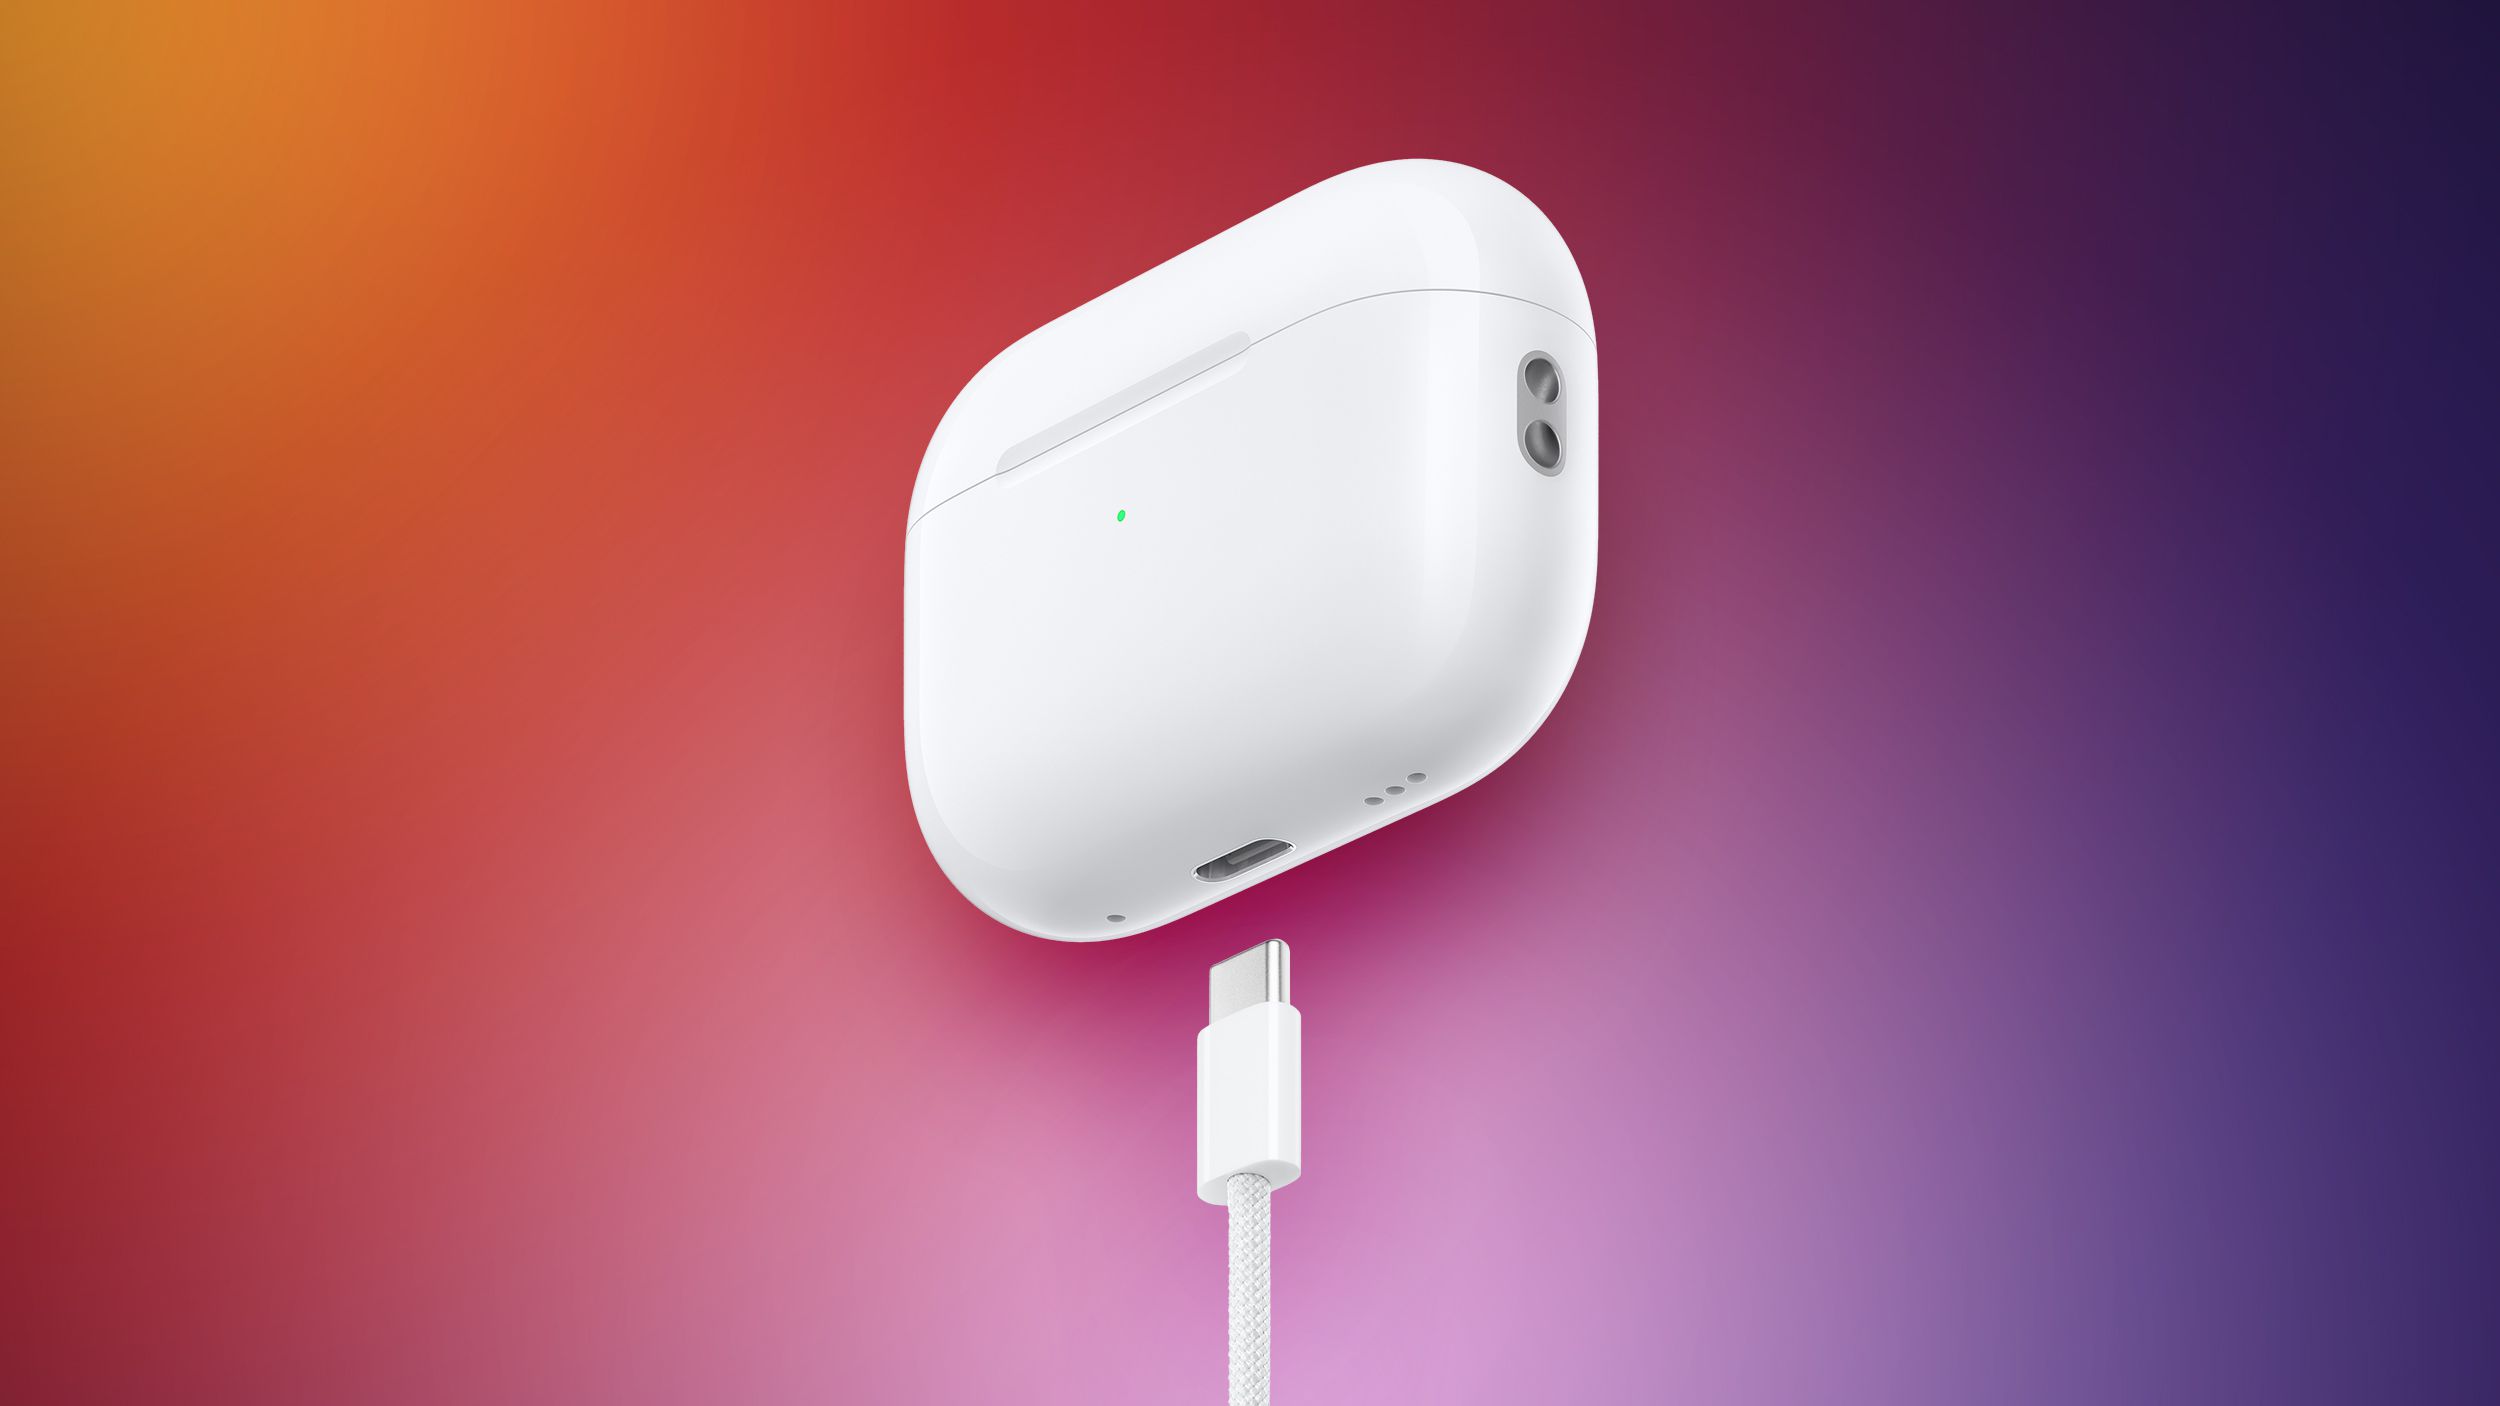 Apple AirPods Pro Confirmed to be Getting USB-C Charging, But Only